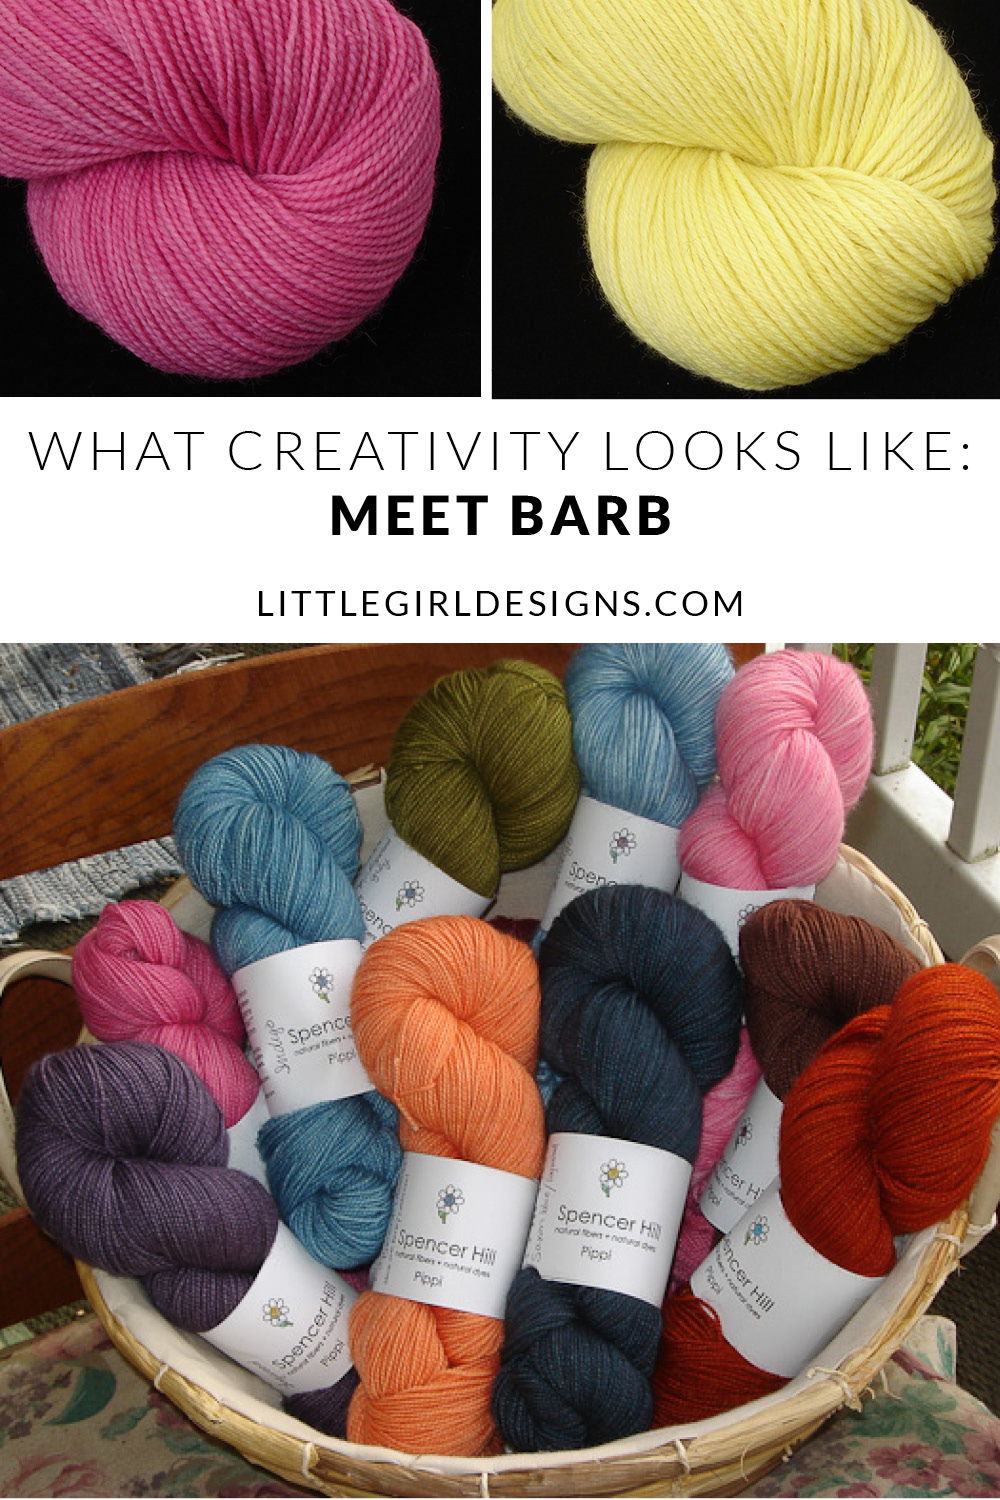 What Creativity Looks Like: Meet Barb—come over today to read about Barb from Spencer Hill Yarn. I loved learning her perspective on creativity. :)